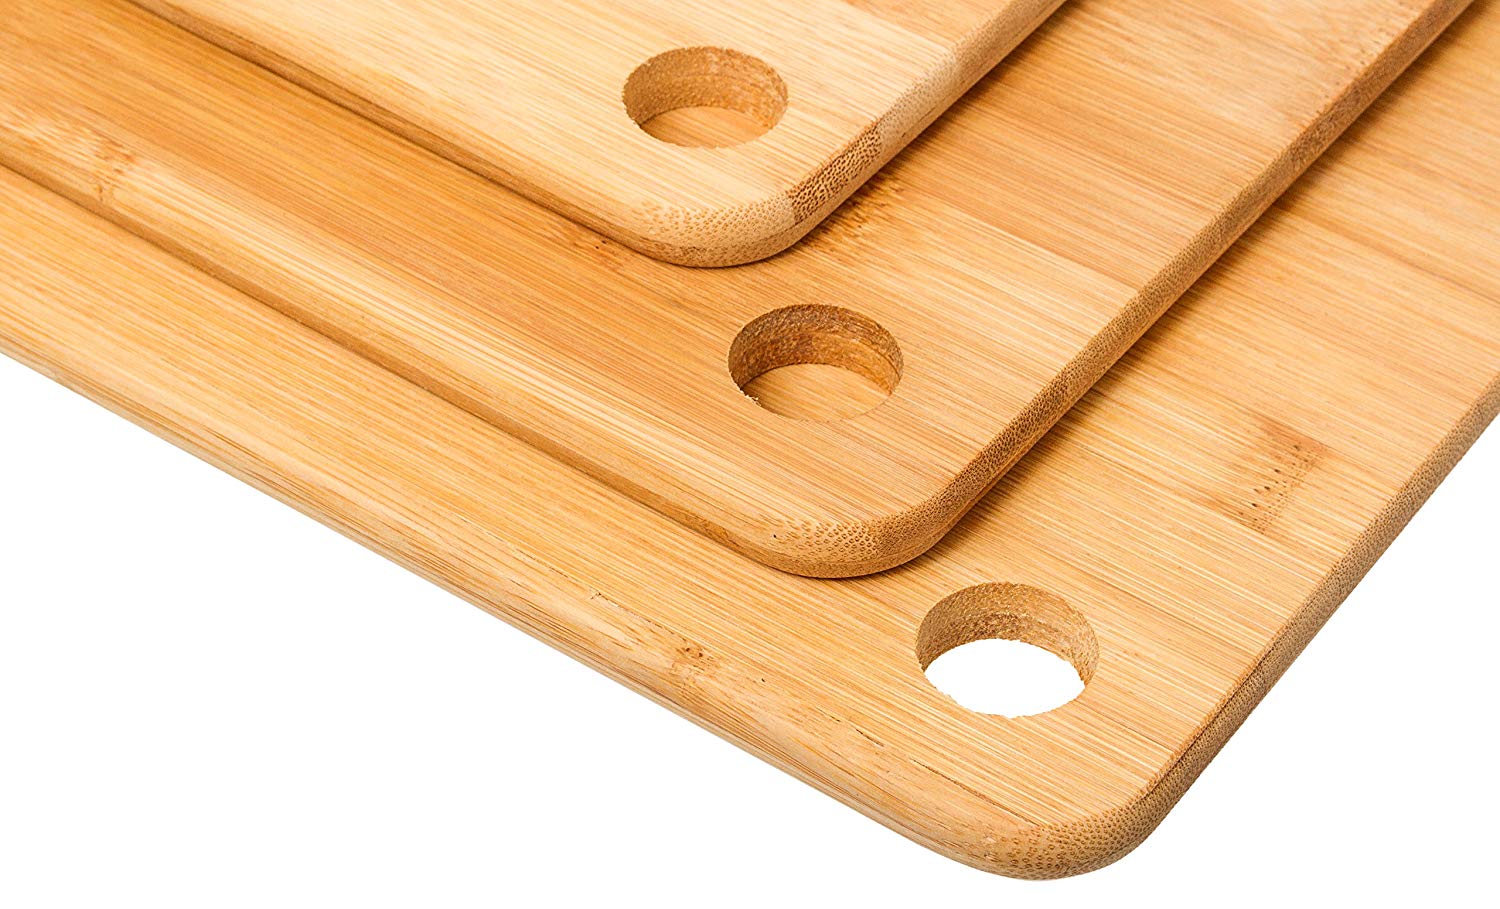 3 Pc Durable Bamboo Cutting Boards - Sturdy Chopping Board or Carving Board Block (Solid)